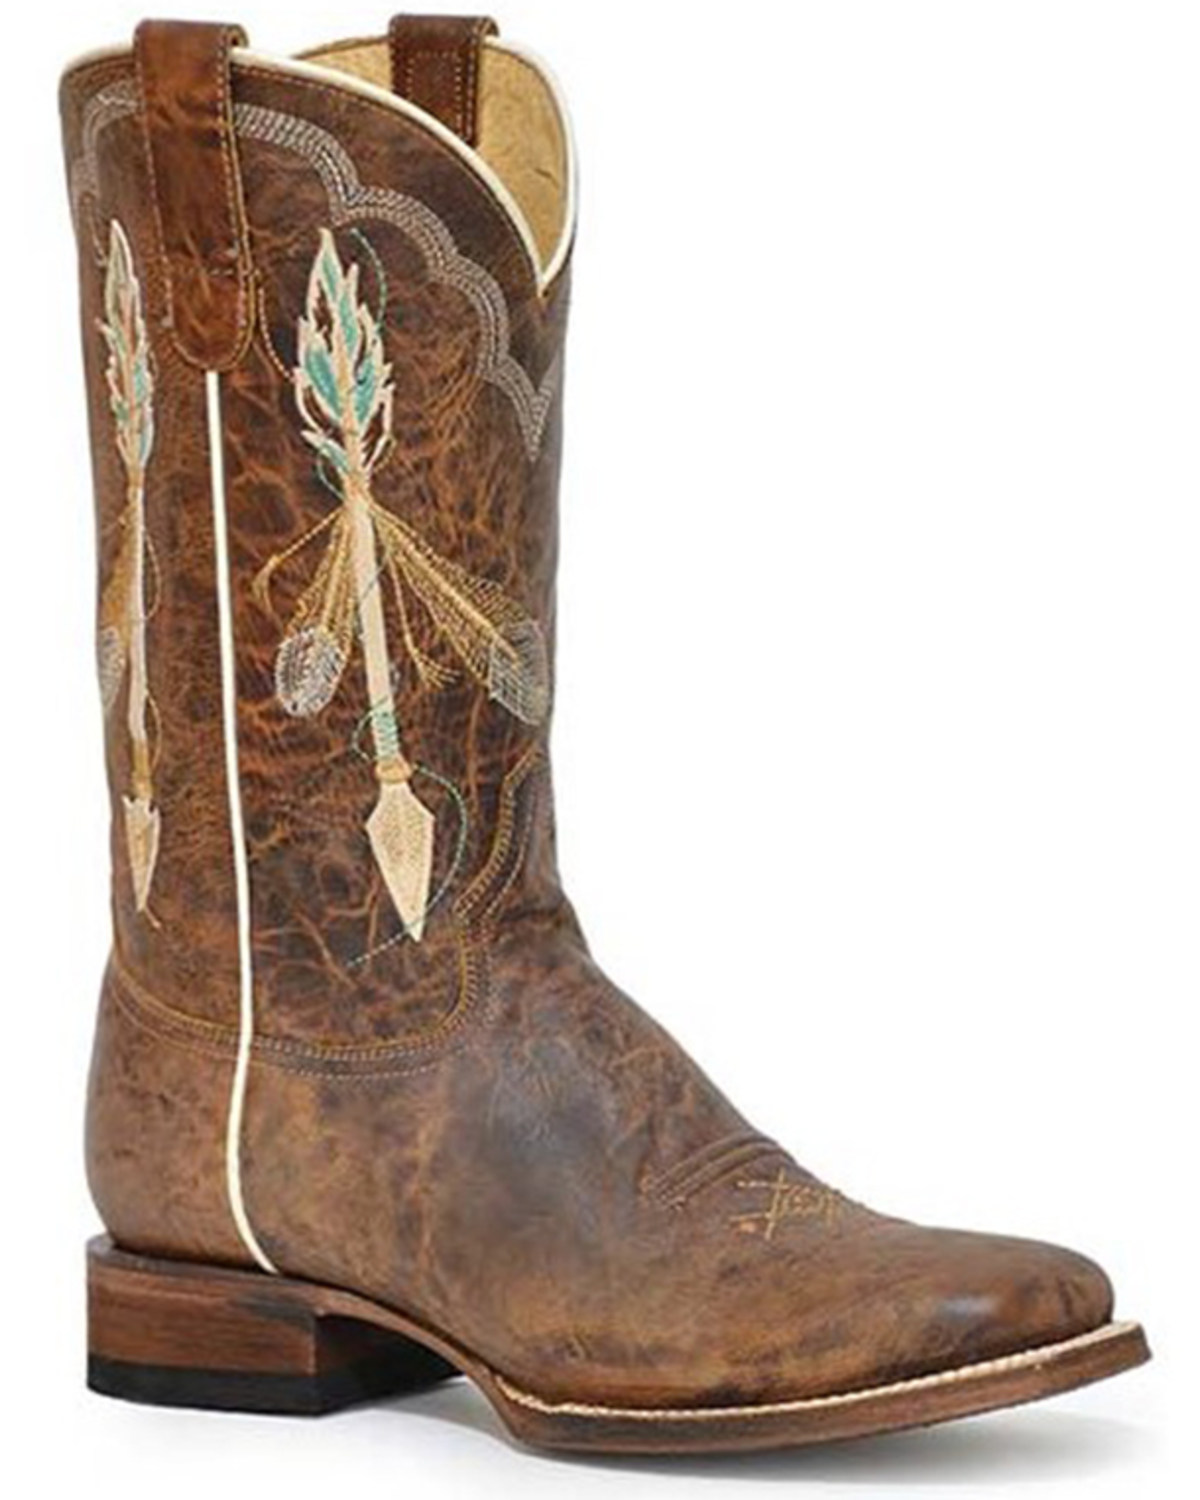 Roper Women's Arrow Feather Western Performance Boots - Broad Square Toe